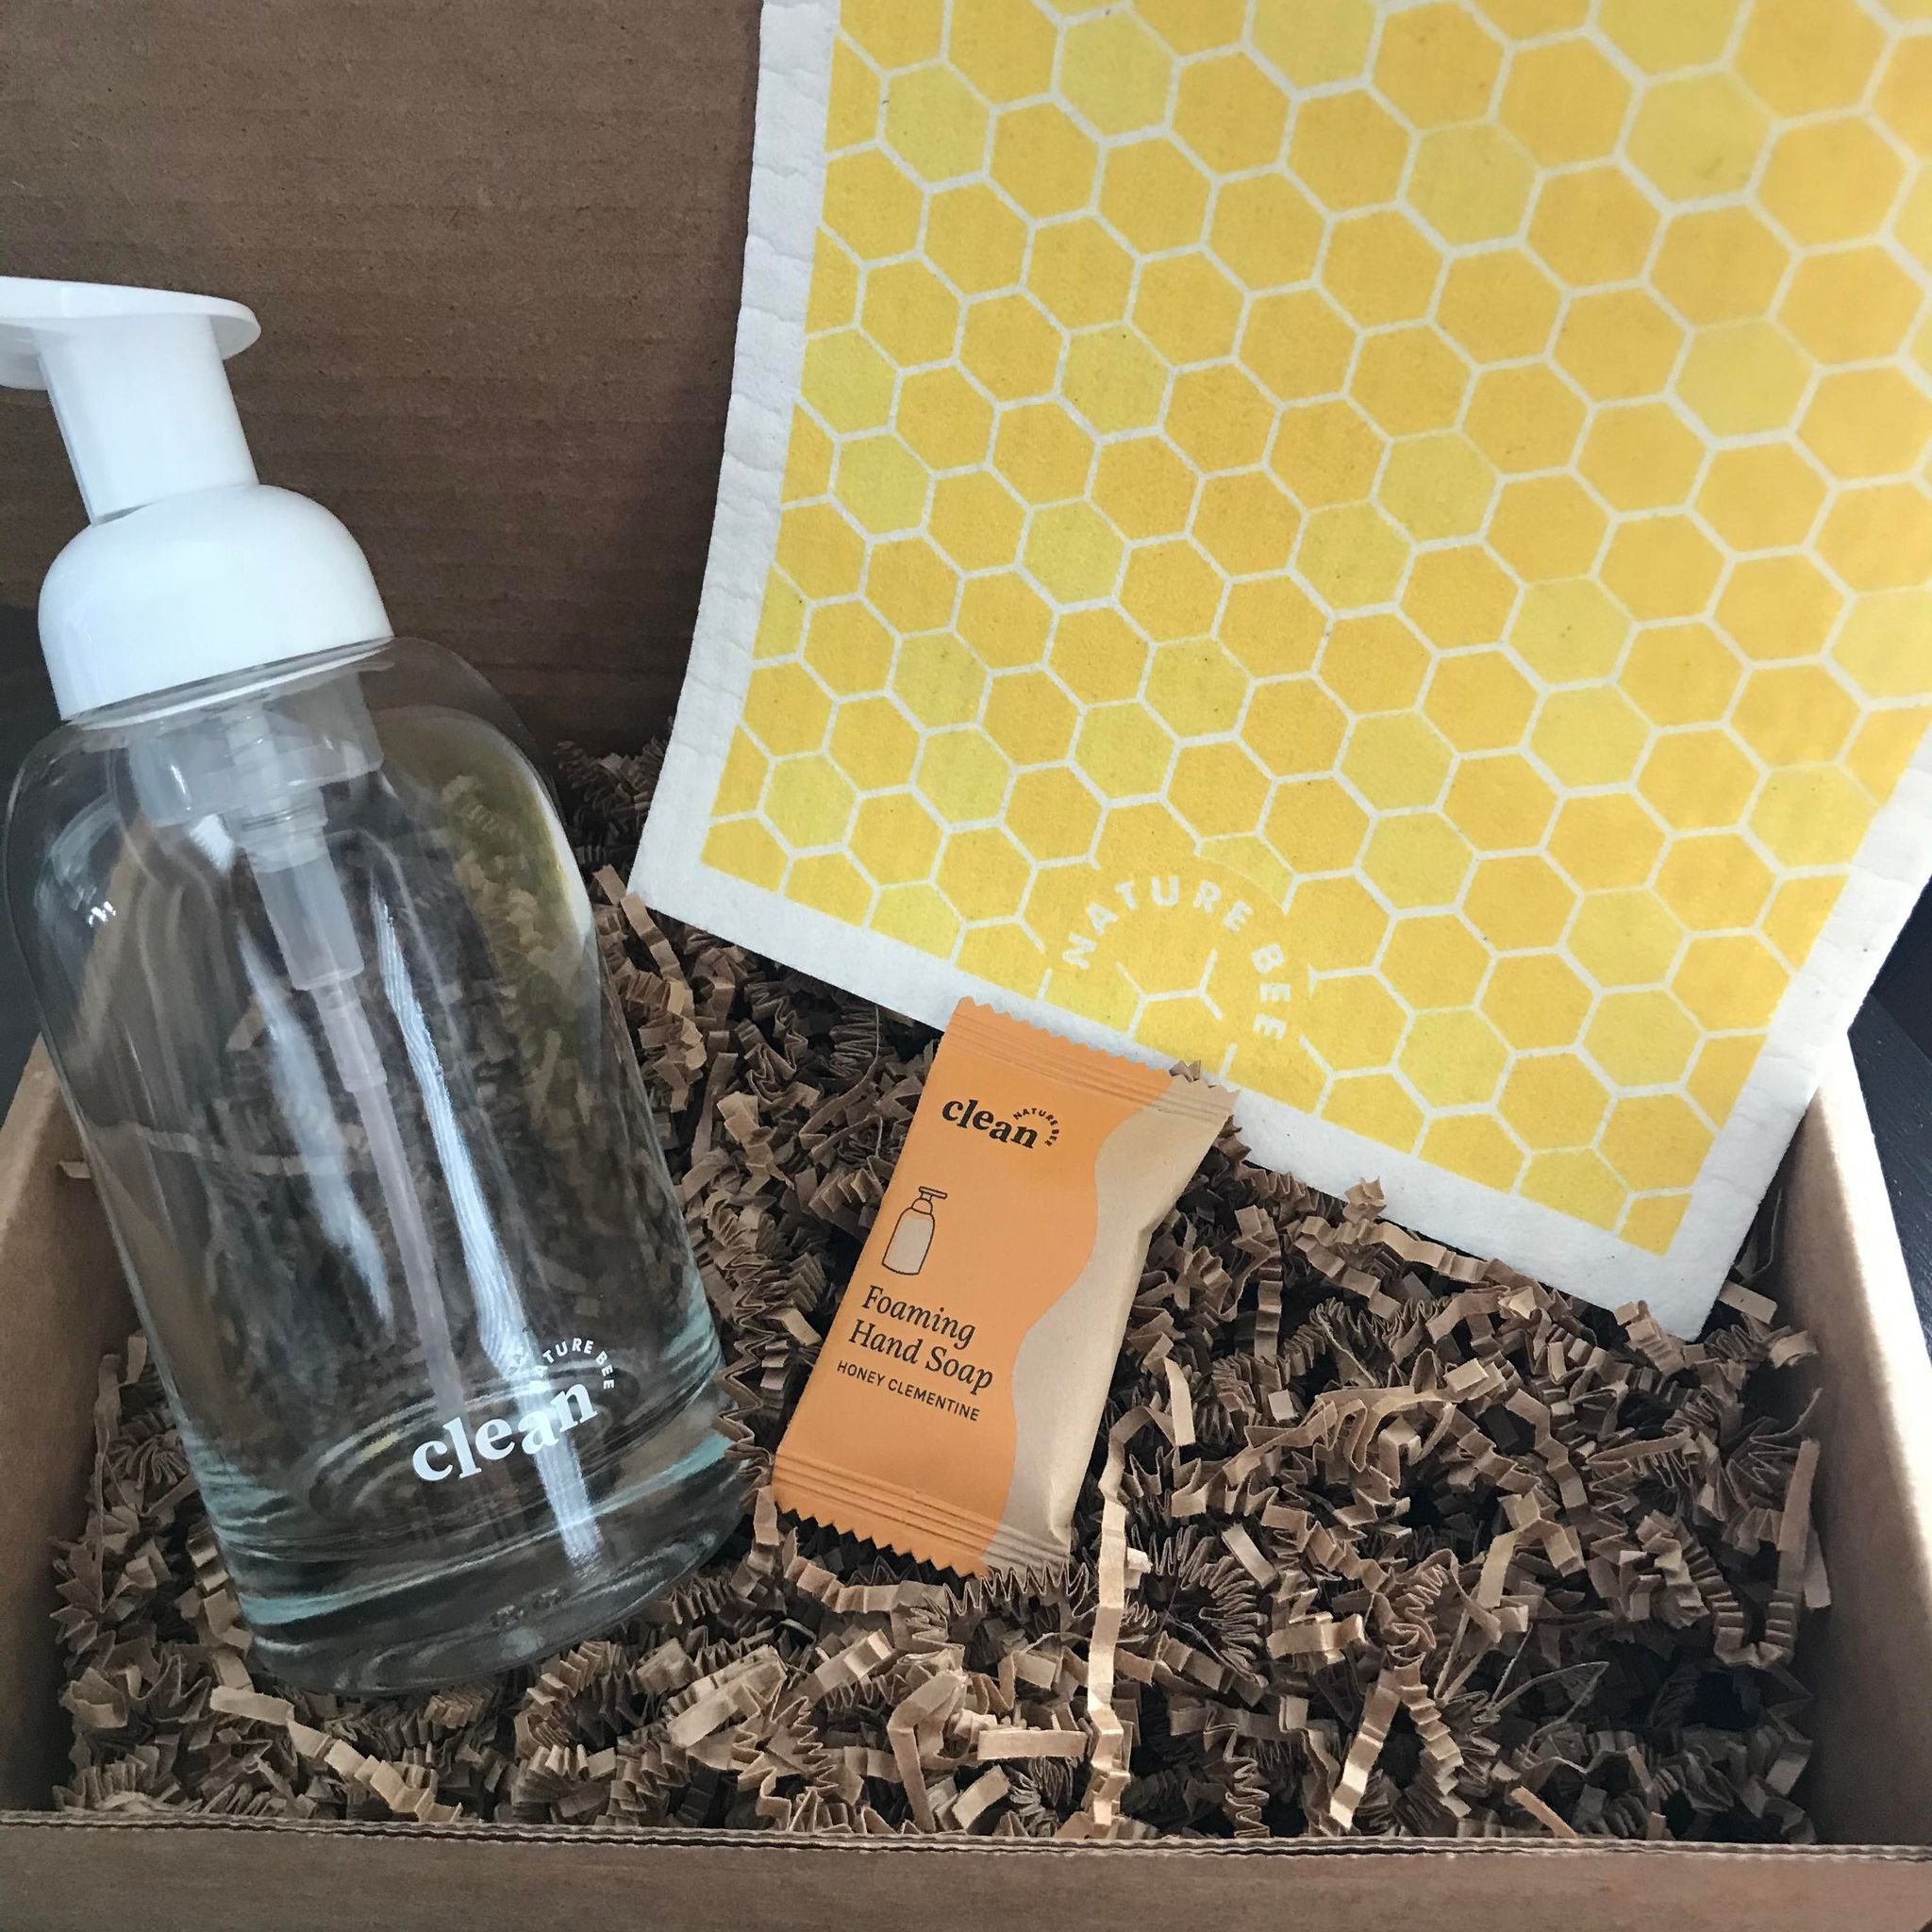 Included in this honey clementine hand soap kit is Swedish sponge cloth in a yellow honeycomb pattern, a foaming hand soap tablet and a refillable glass soap dispenser.